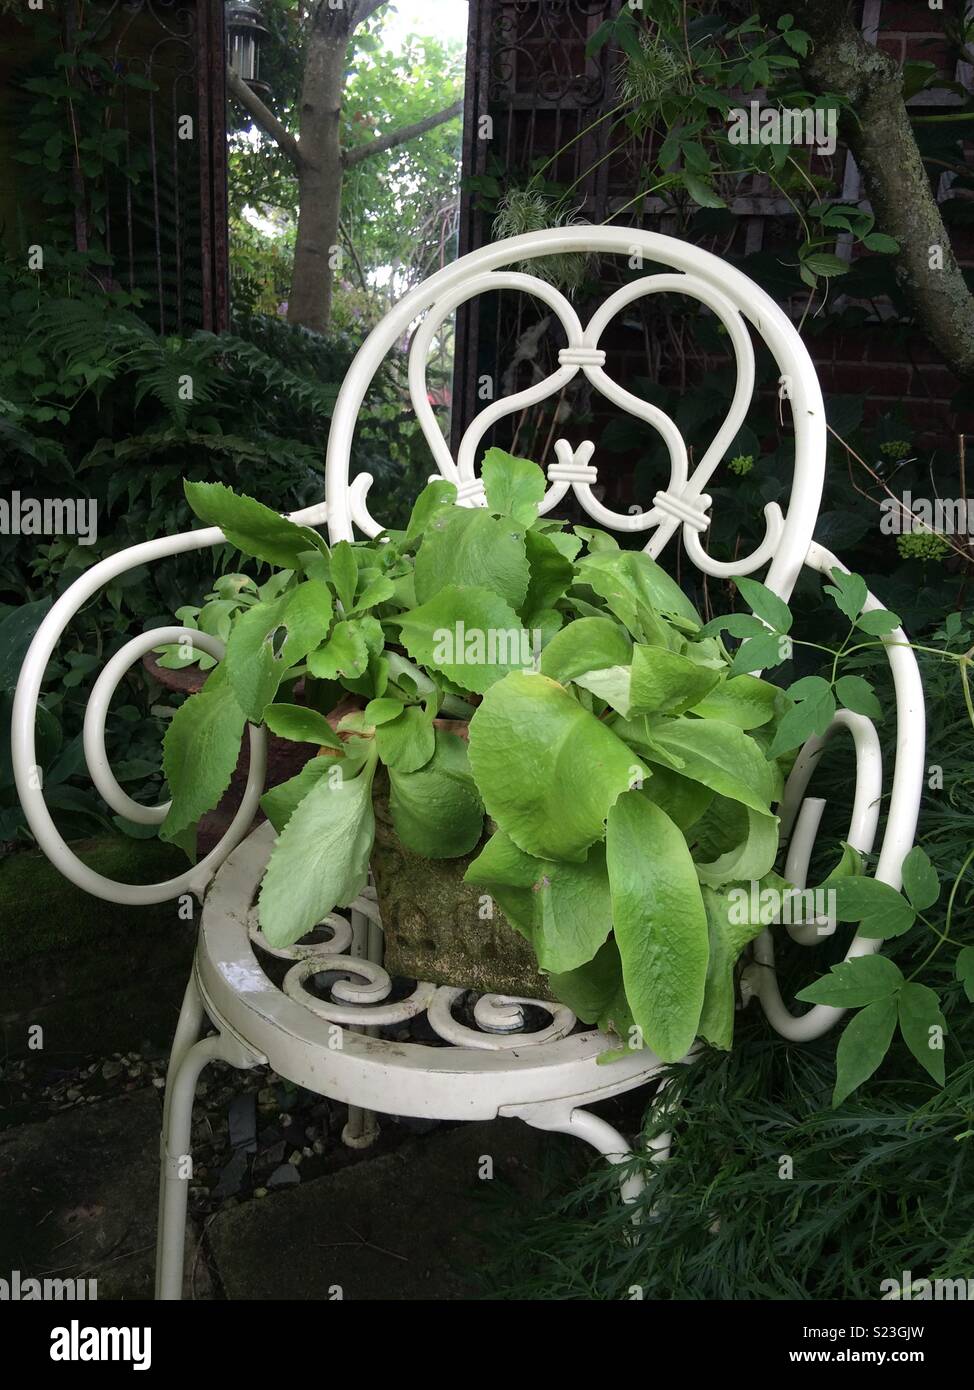 Planted chair Stock Photo